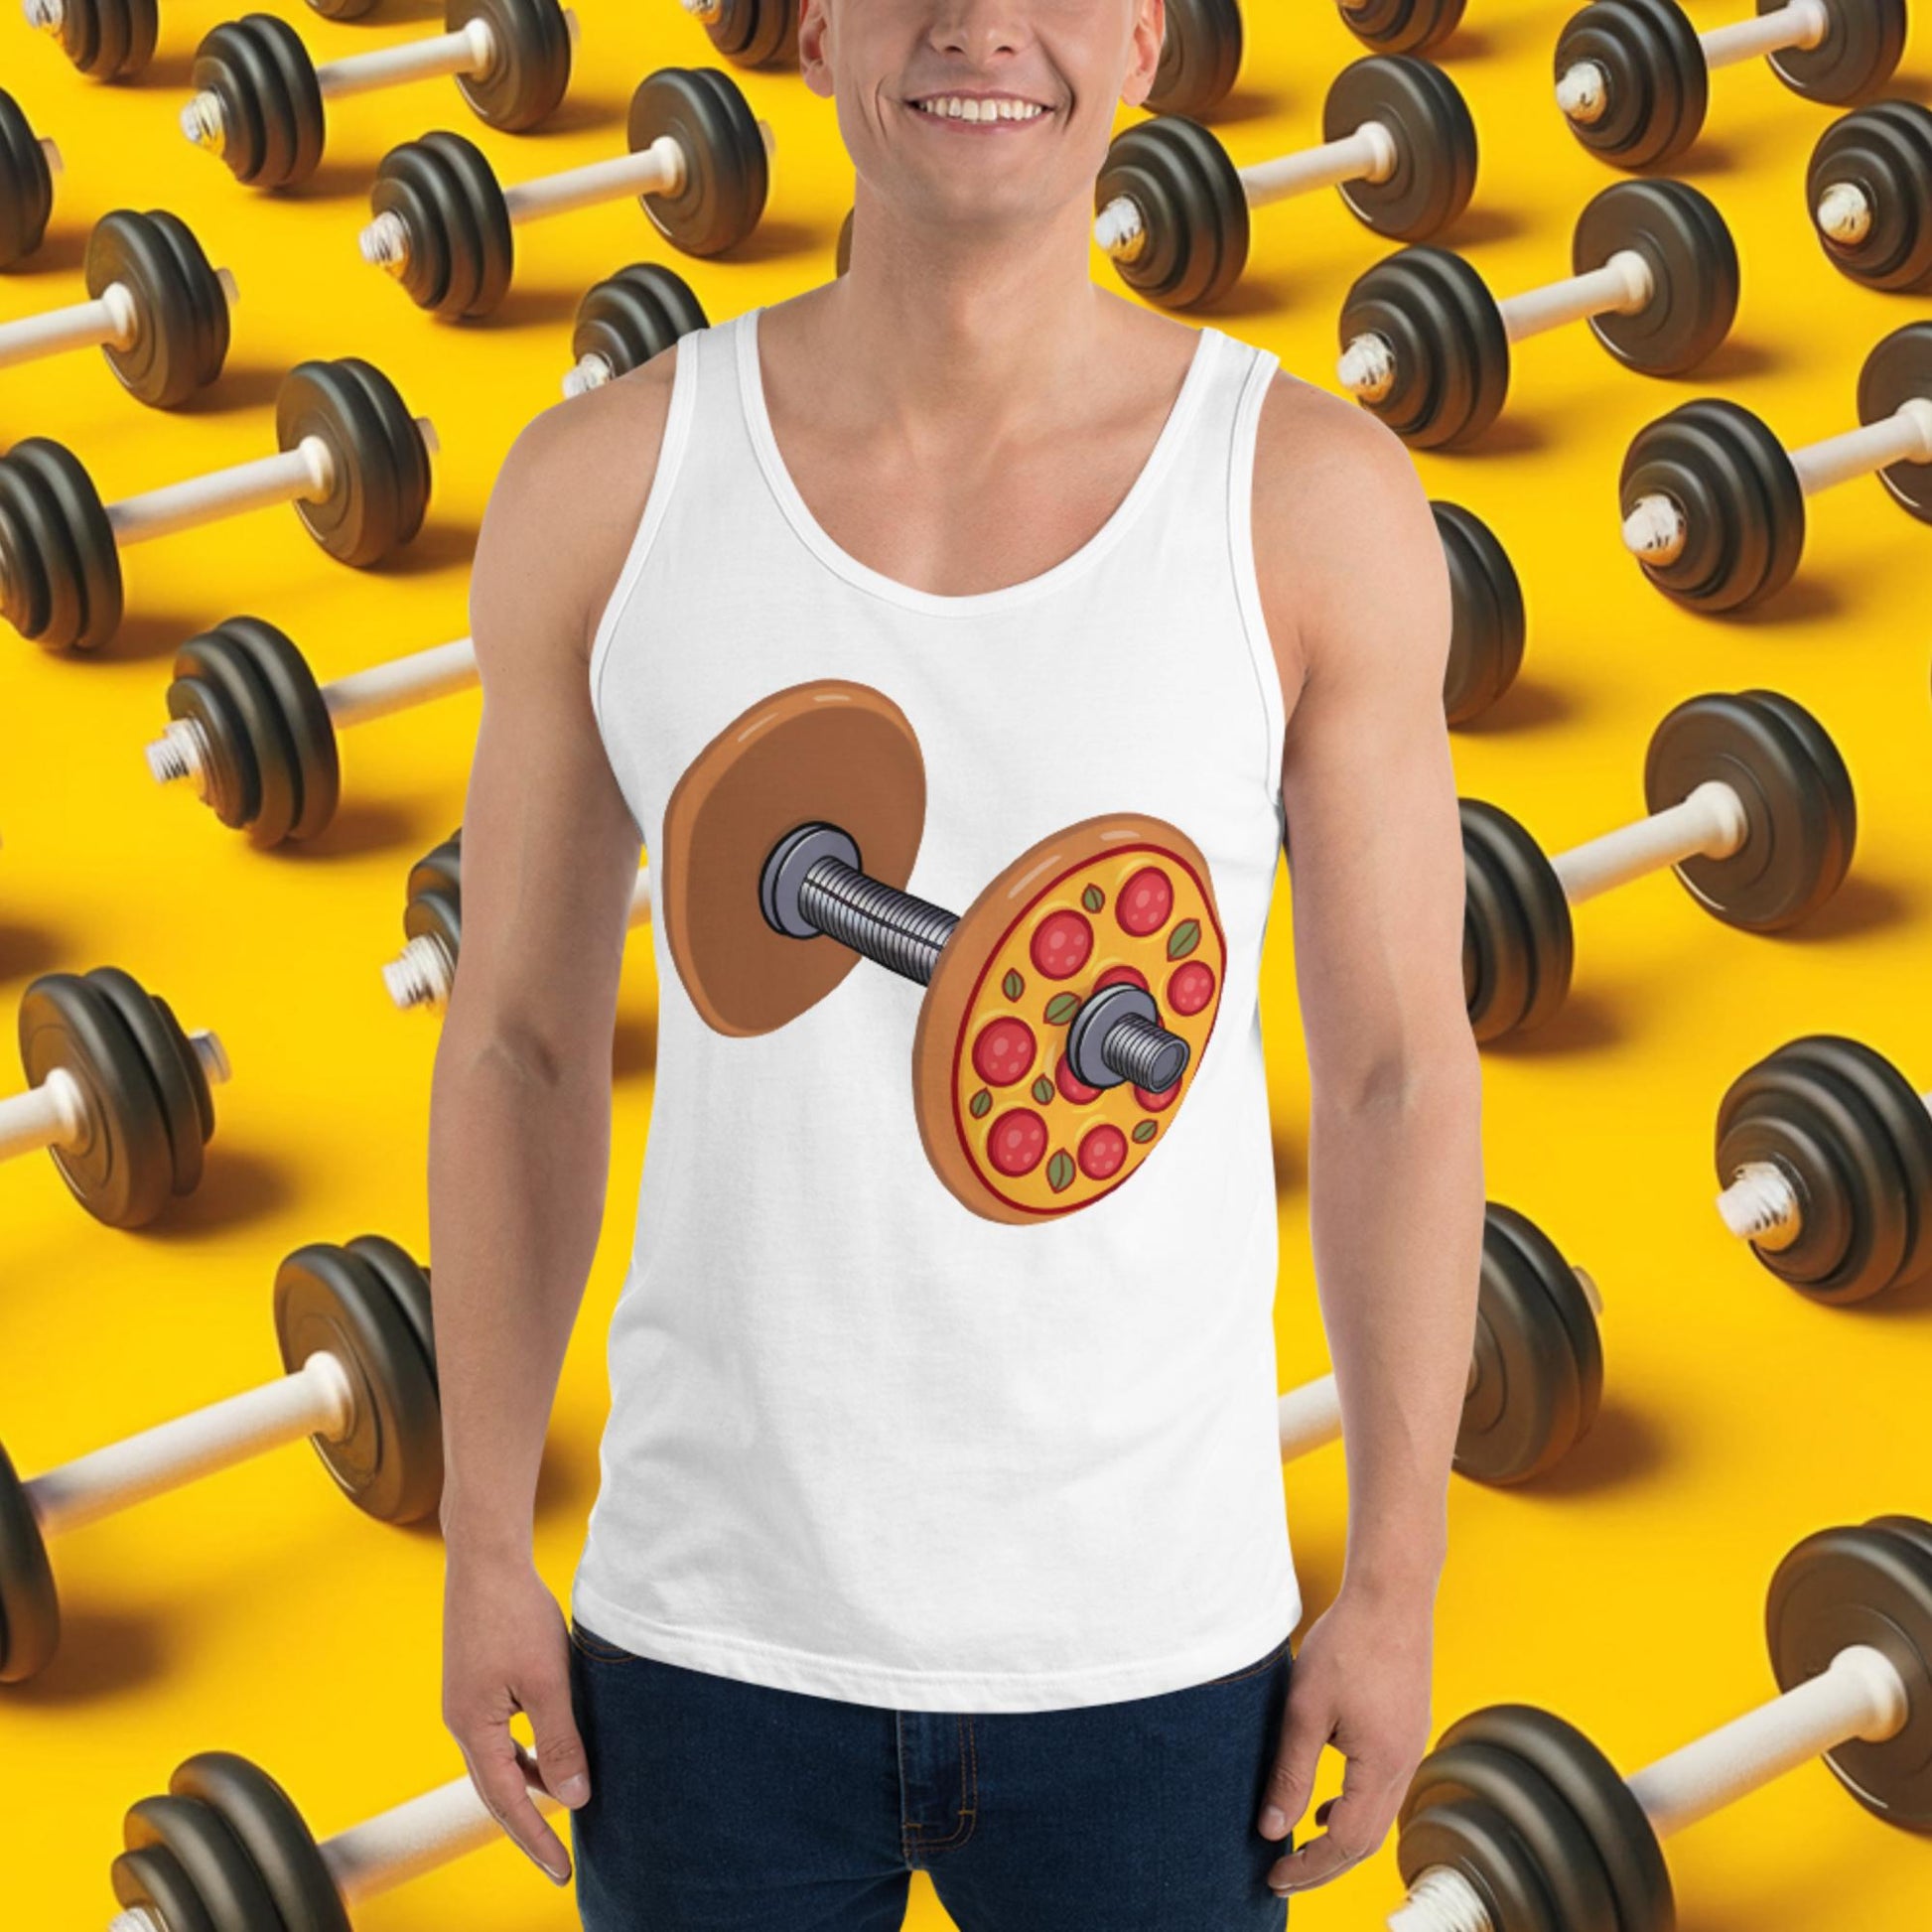 Pizza Dumbbell Barbell Funny Bulk Diet Gym Workout Fitness Weight Lifting Bodybuilding Tank Top Next Cult Brand